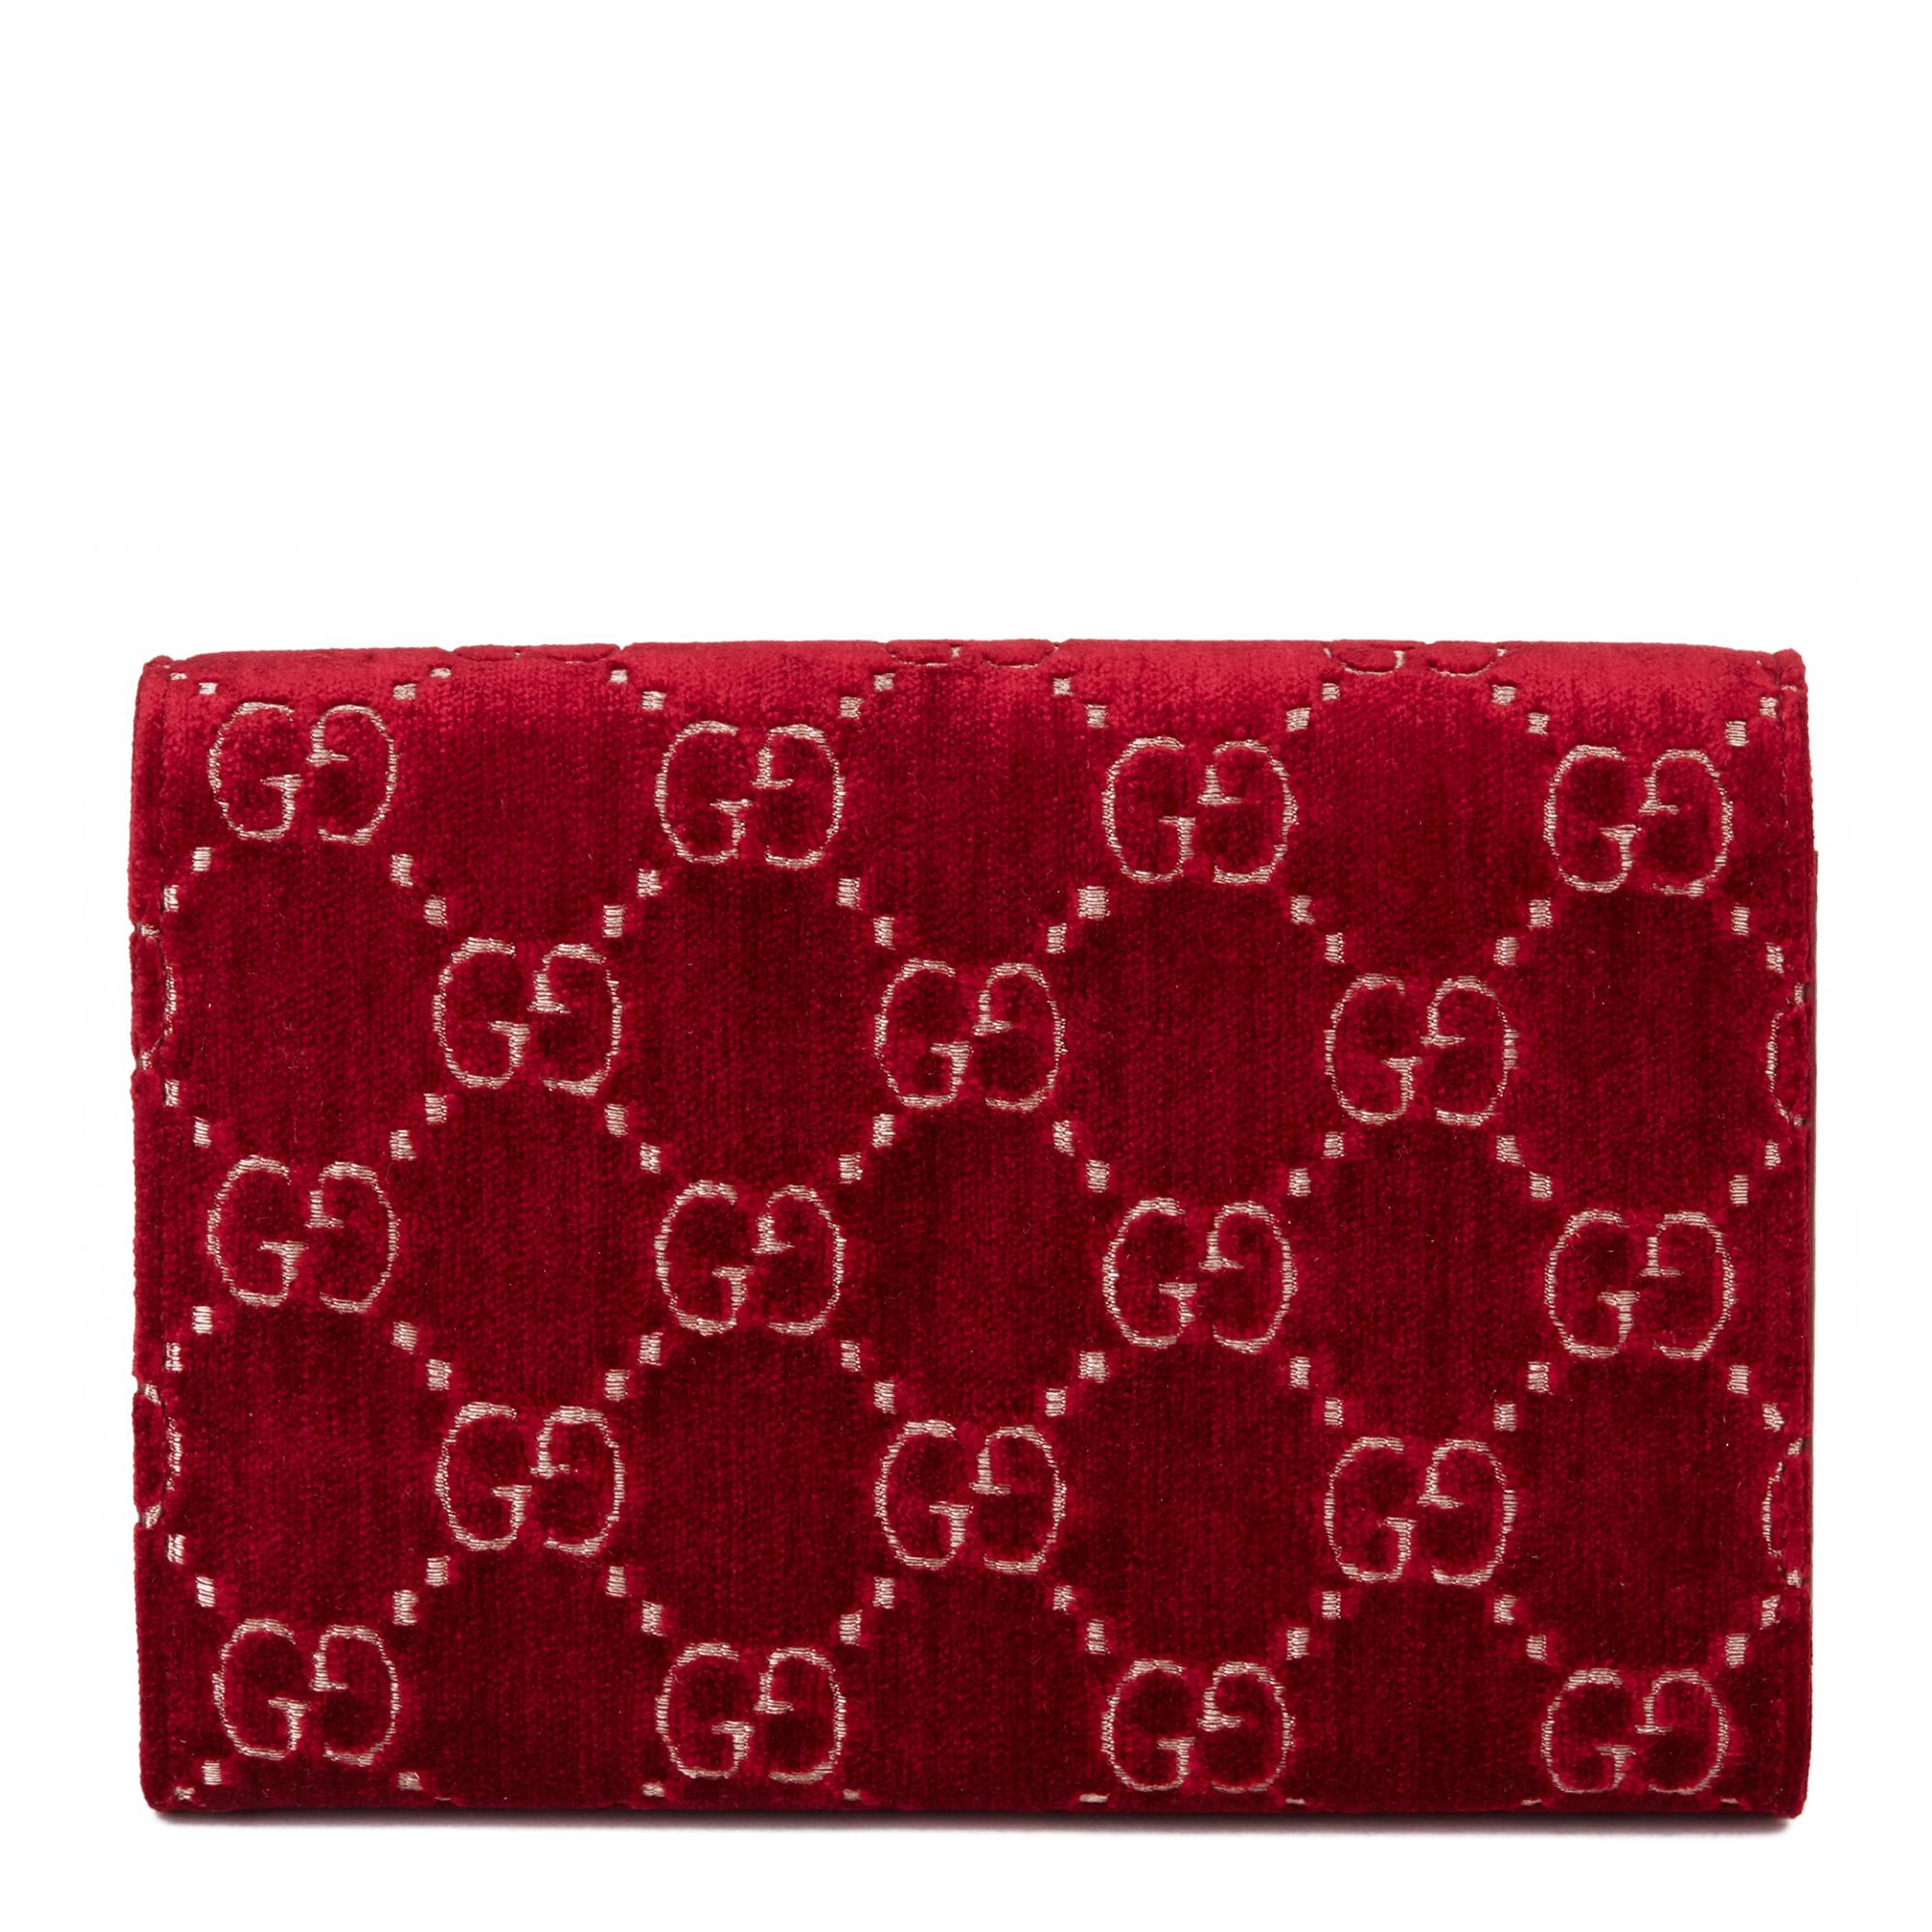 2020 Gucci Red GG Velvet & Calfskin Leather Dionysus Wallet-on-Chain 2